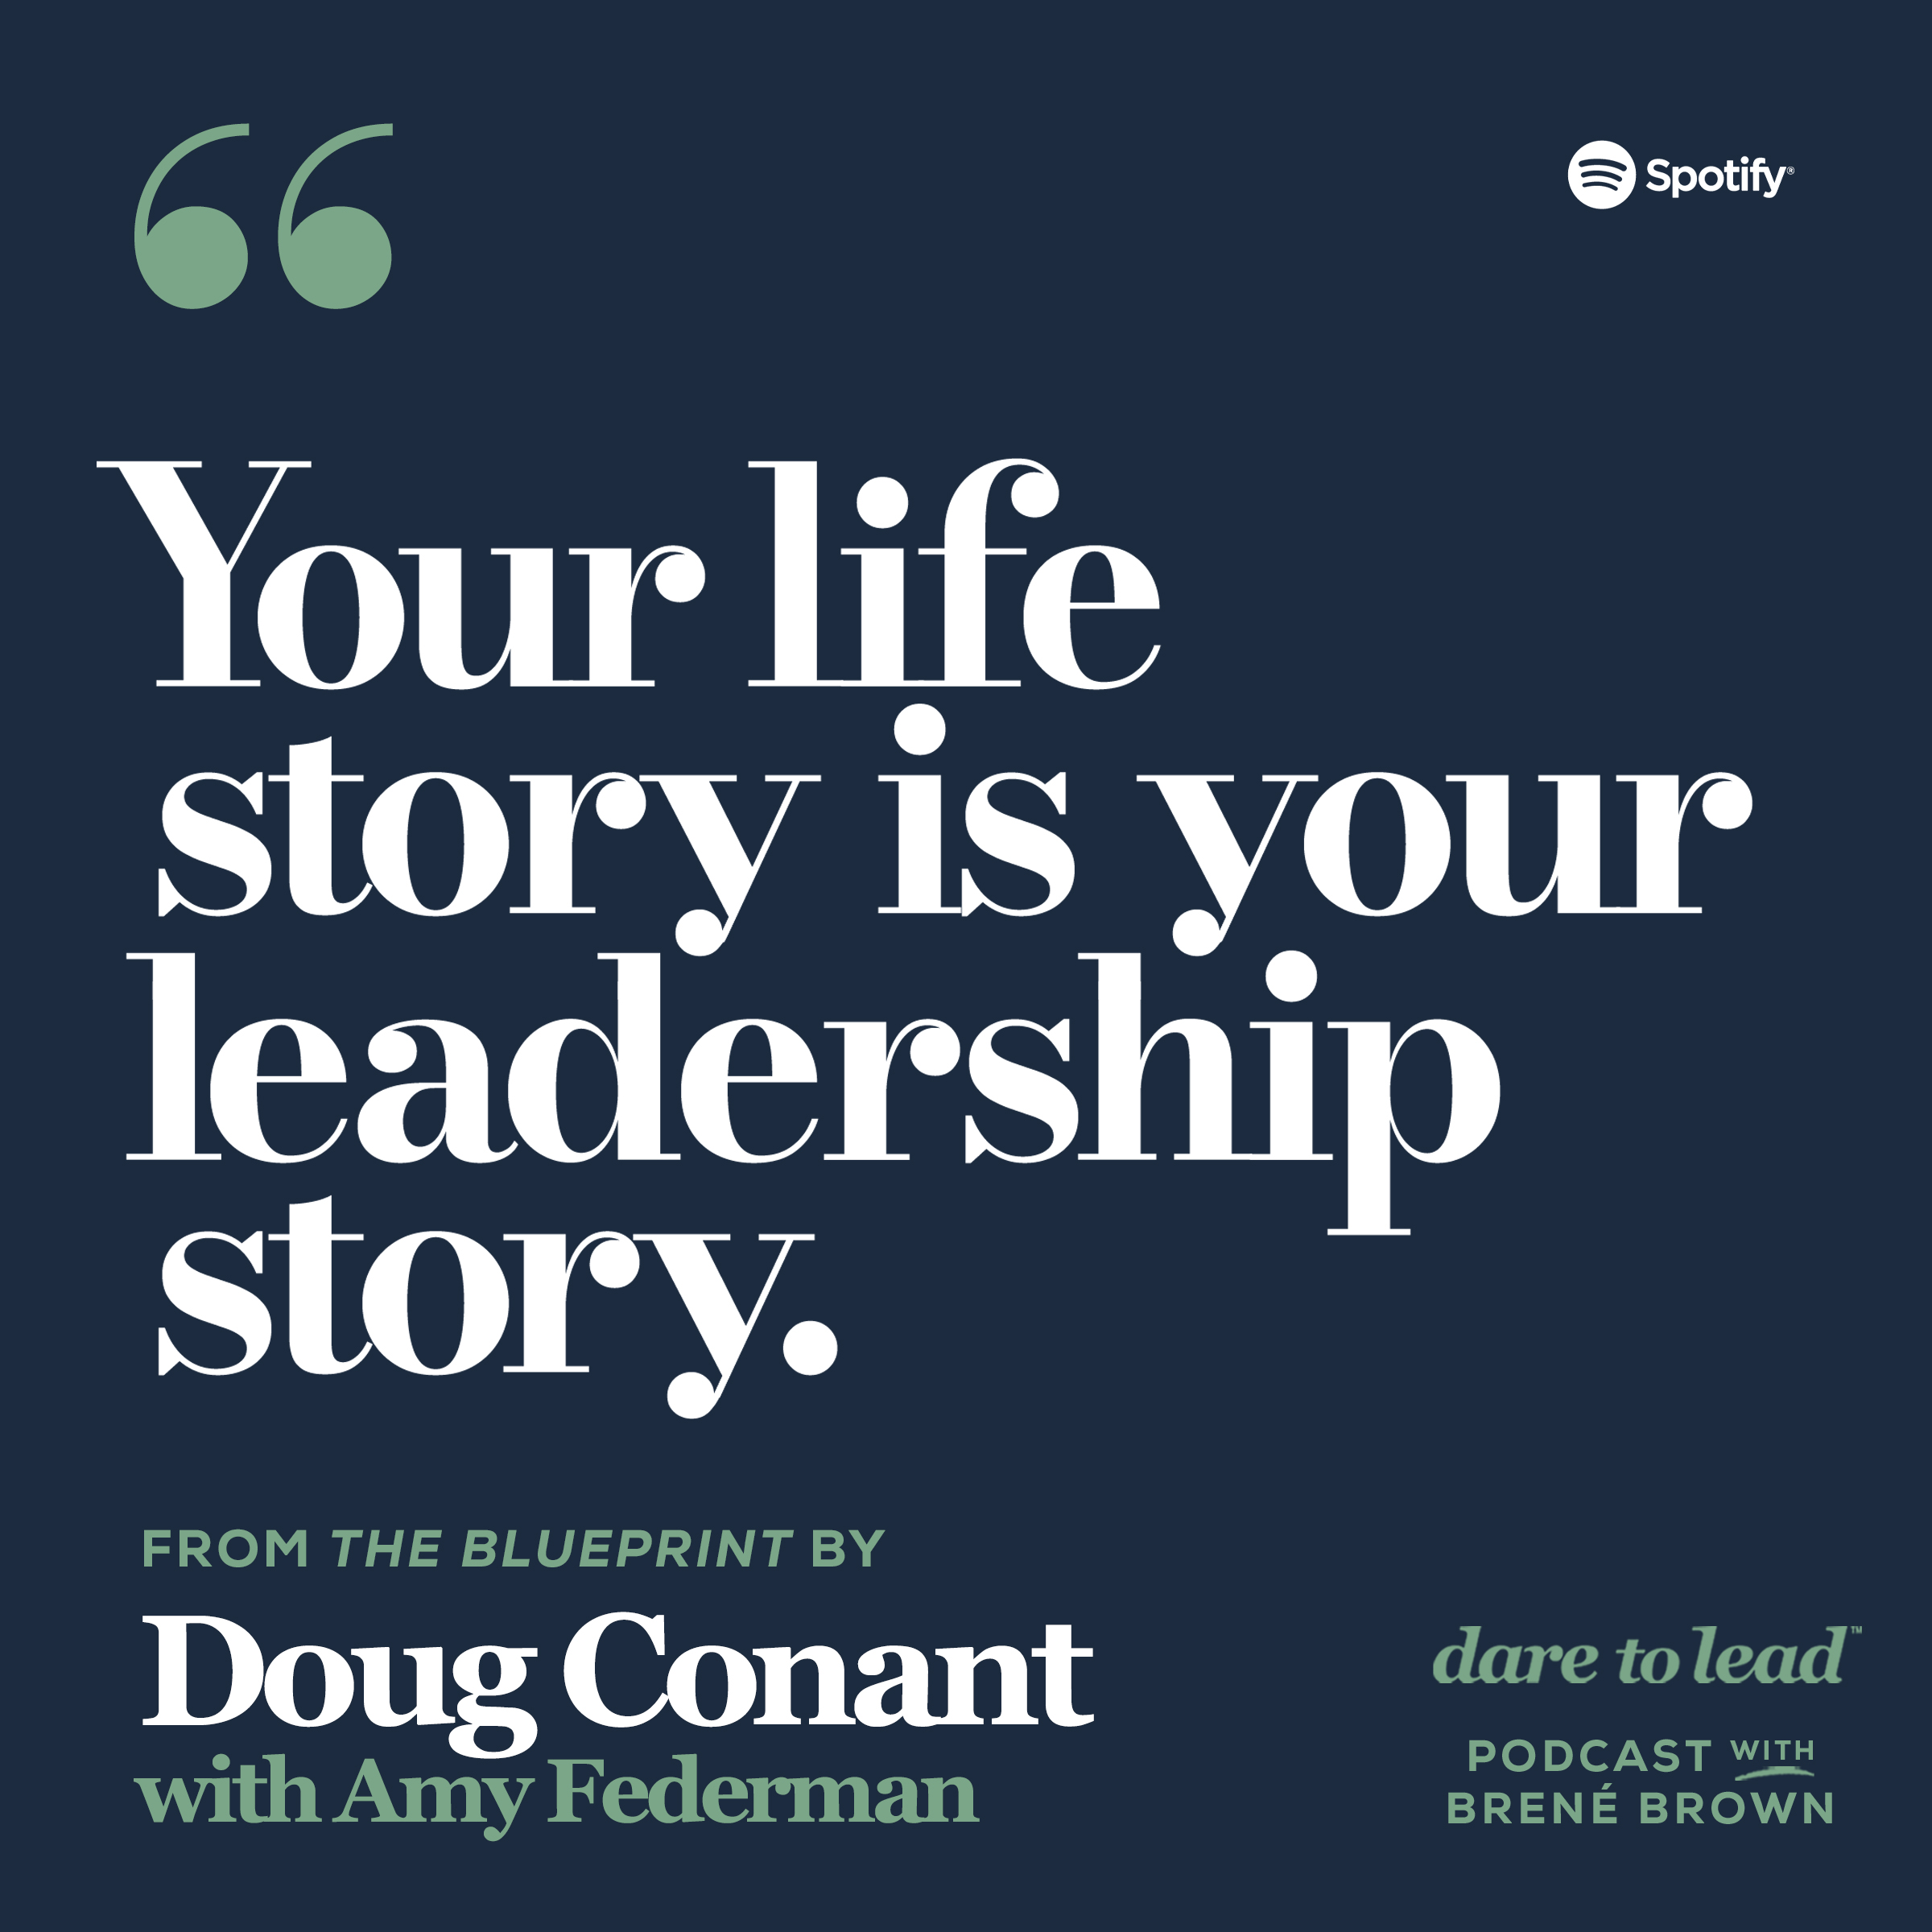 Your life story is your leadership story. -by Doug Conant